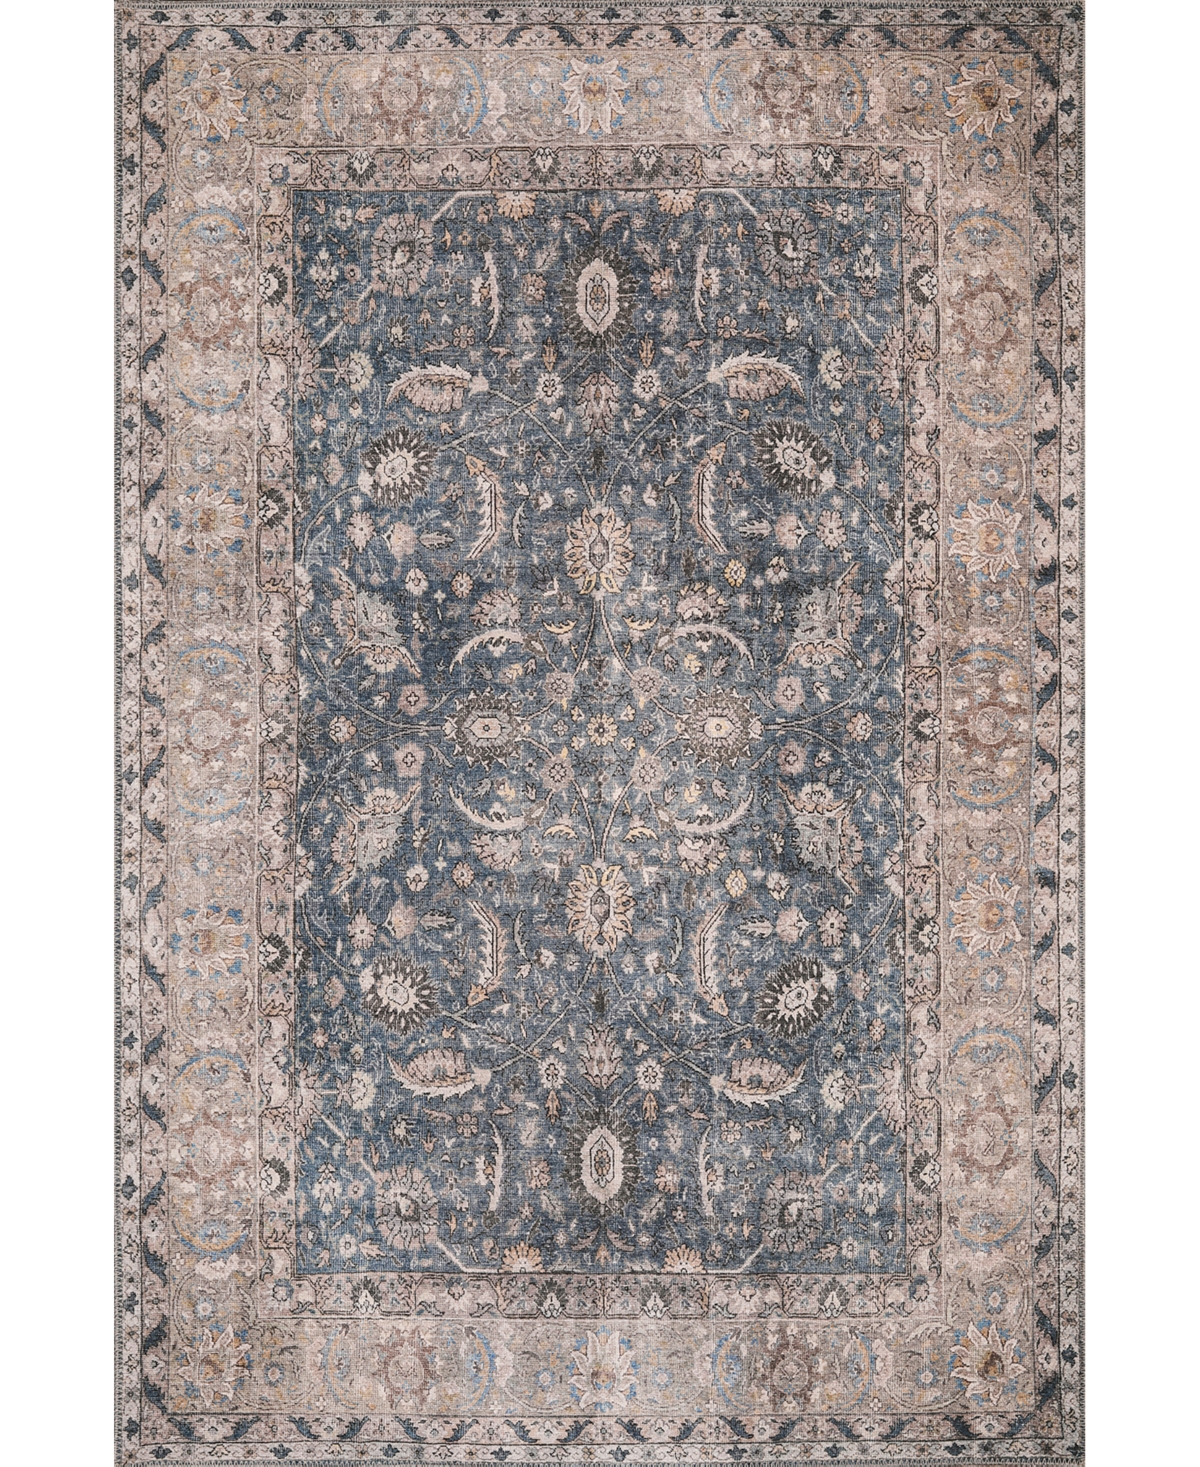 Kas London Machine Washable 4802 5' X 7'6" Area Rug In Blue